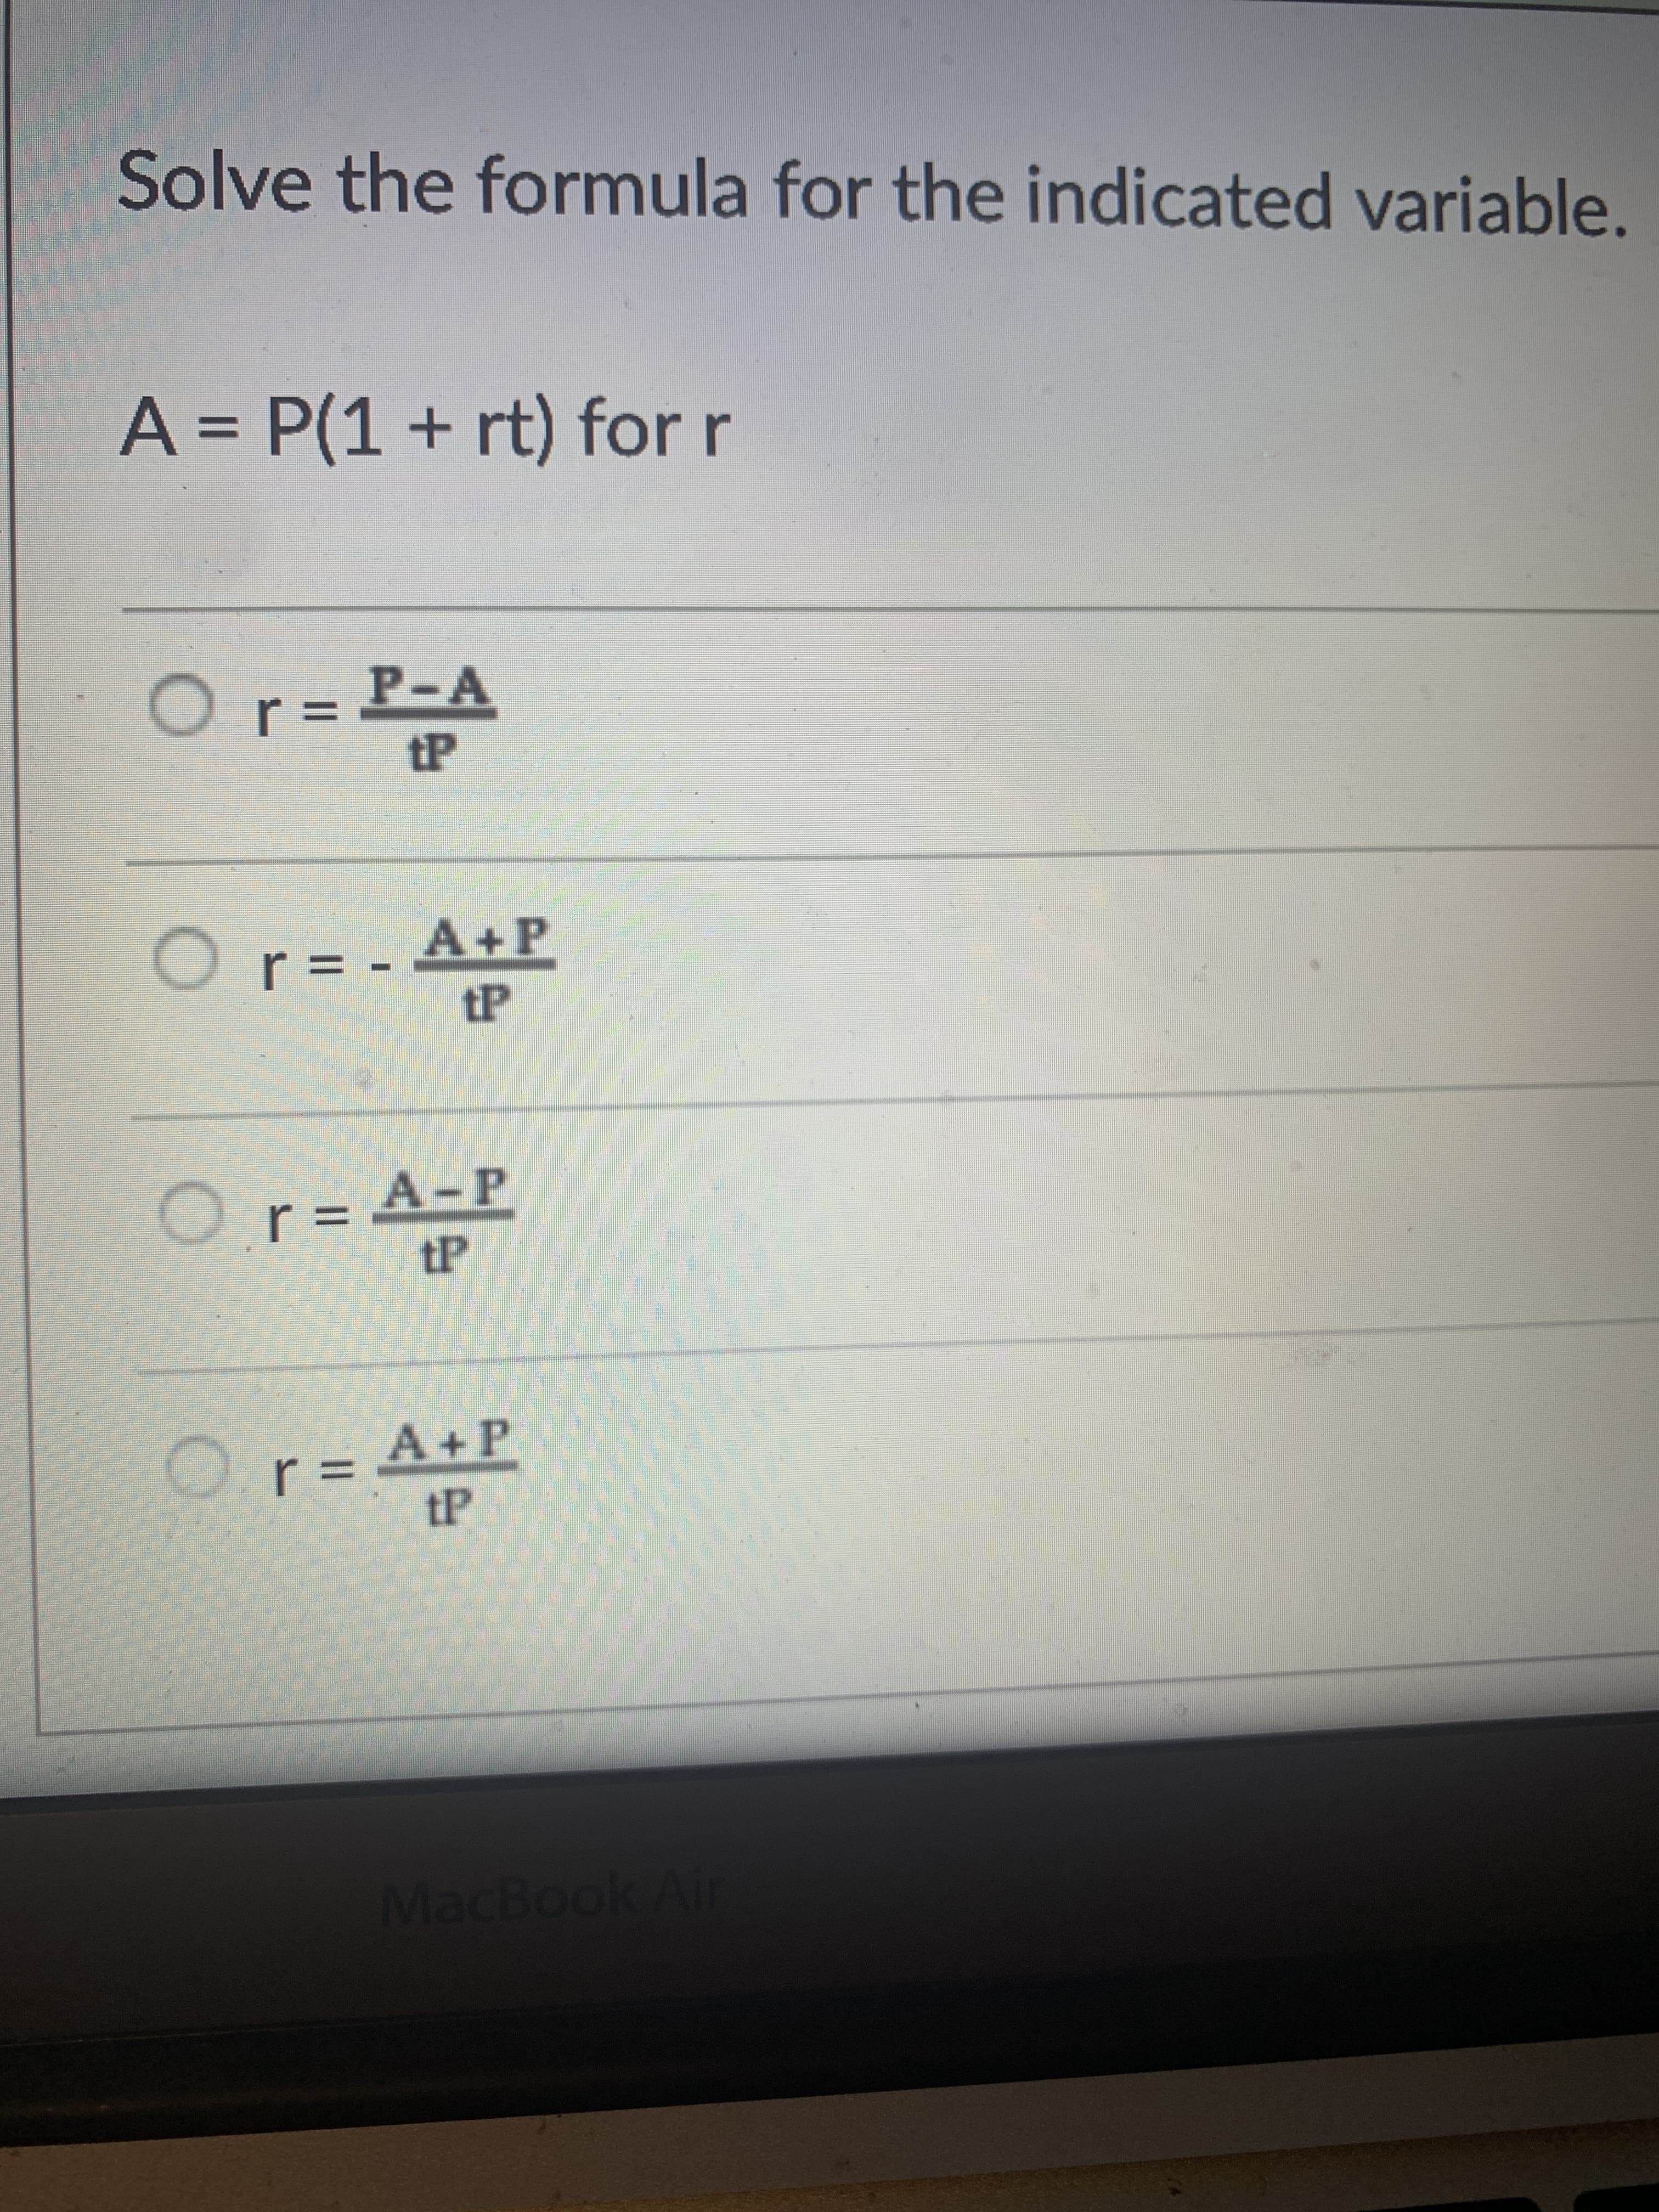 Solve the formula for the indicated variable.
A = P(1+ rt) for r
P-A
tP
%3D
Or=
A+P
-
Or=
A-P
tP
%3D
A+P
D.rD
tP
MacBook Air
